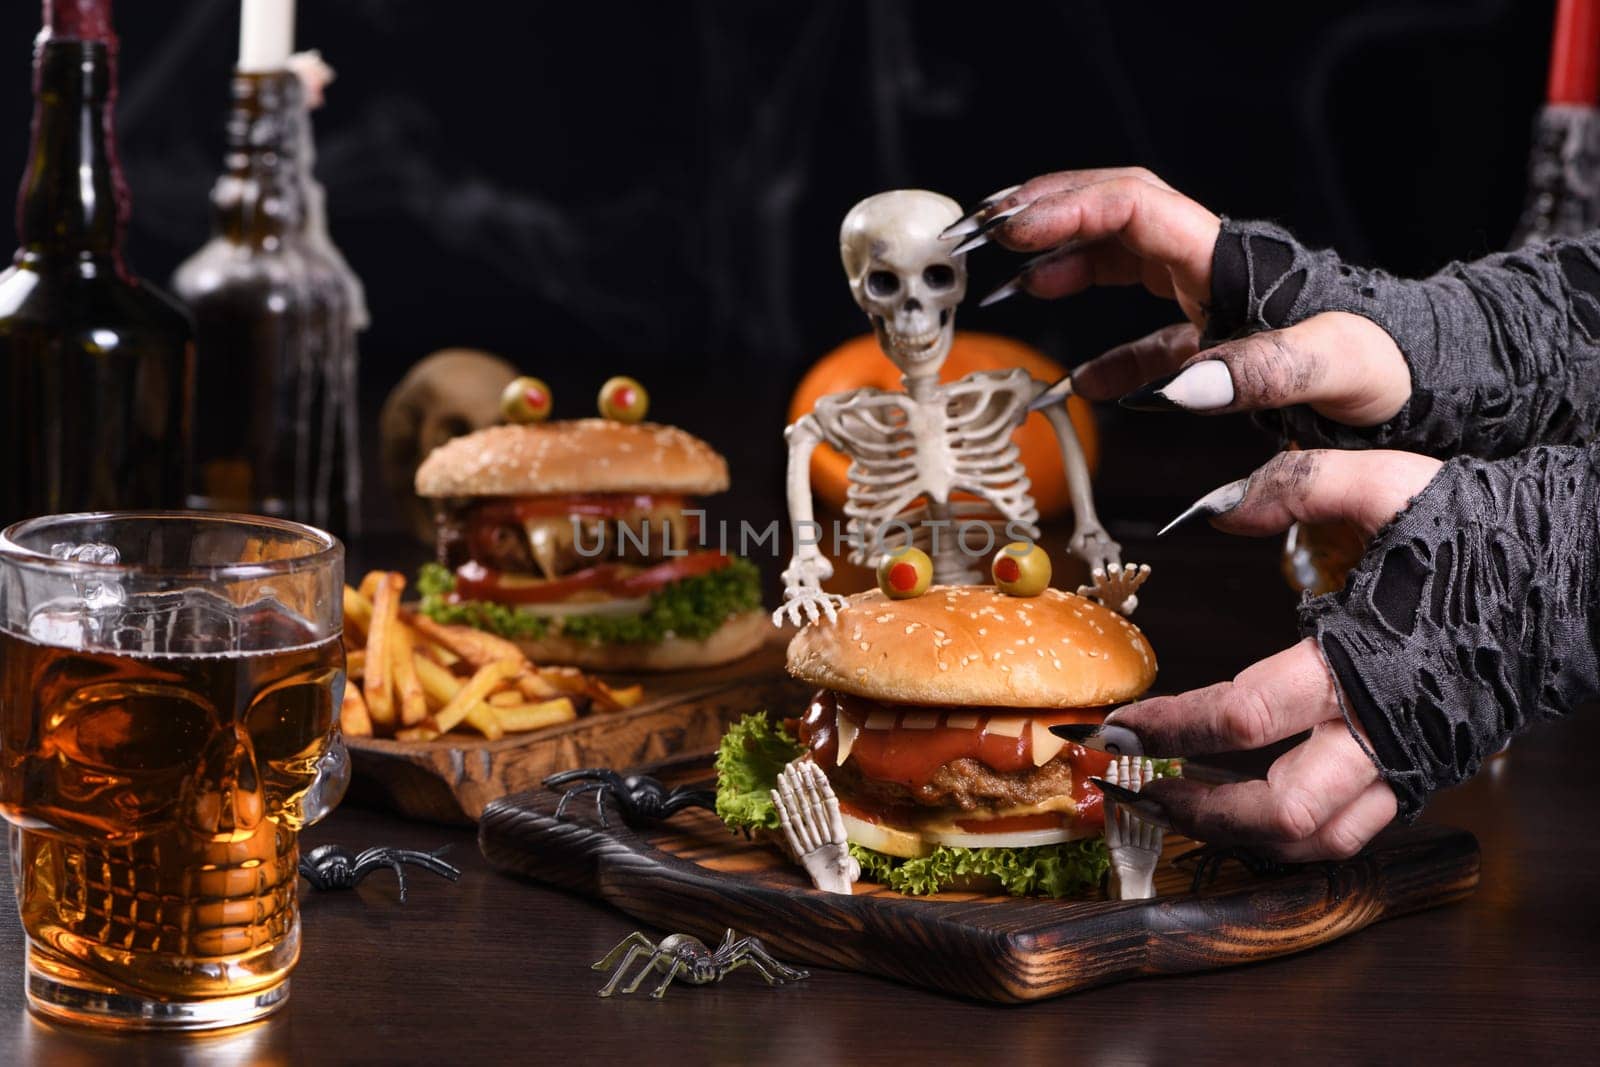 The witches hands want to grab the Monster Burger on the sitting skeleton. Perfect Halloween Party appetizer